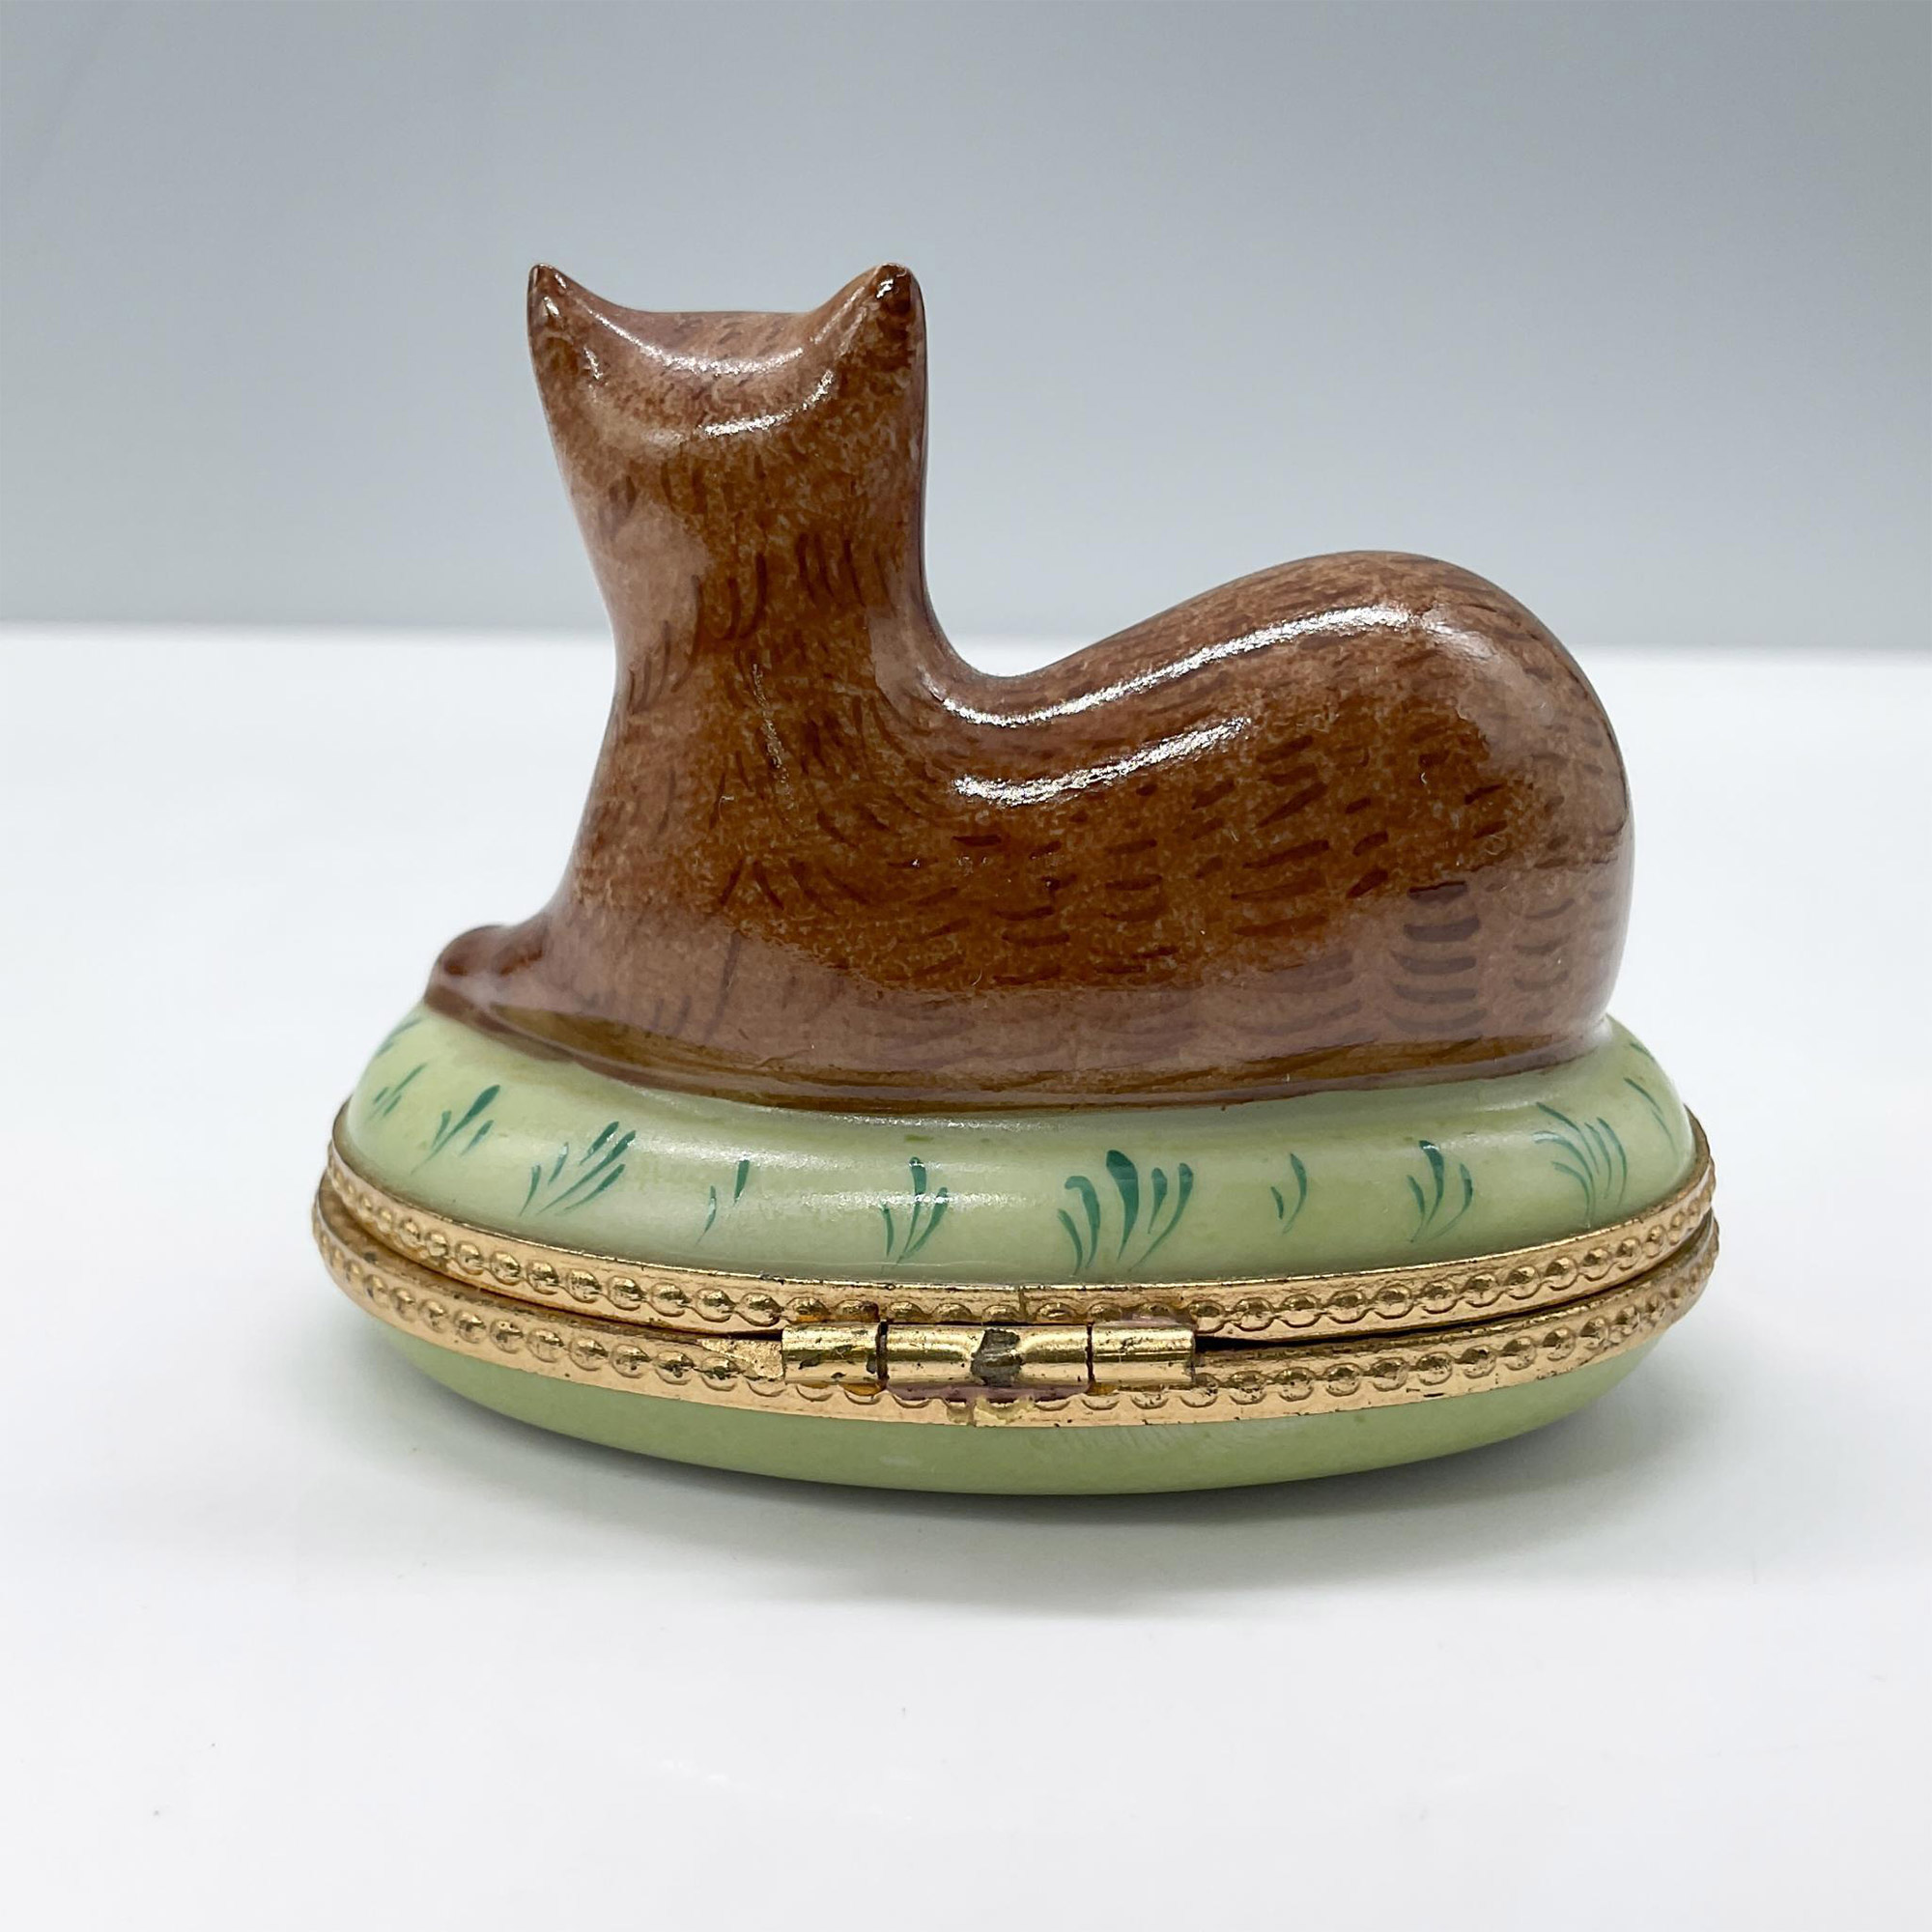 Tiffany & Co x Limoges France Treasure Box, Brown Cat - Image 2 of 4